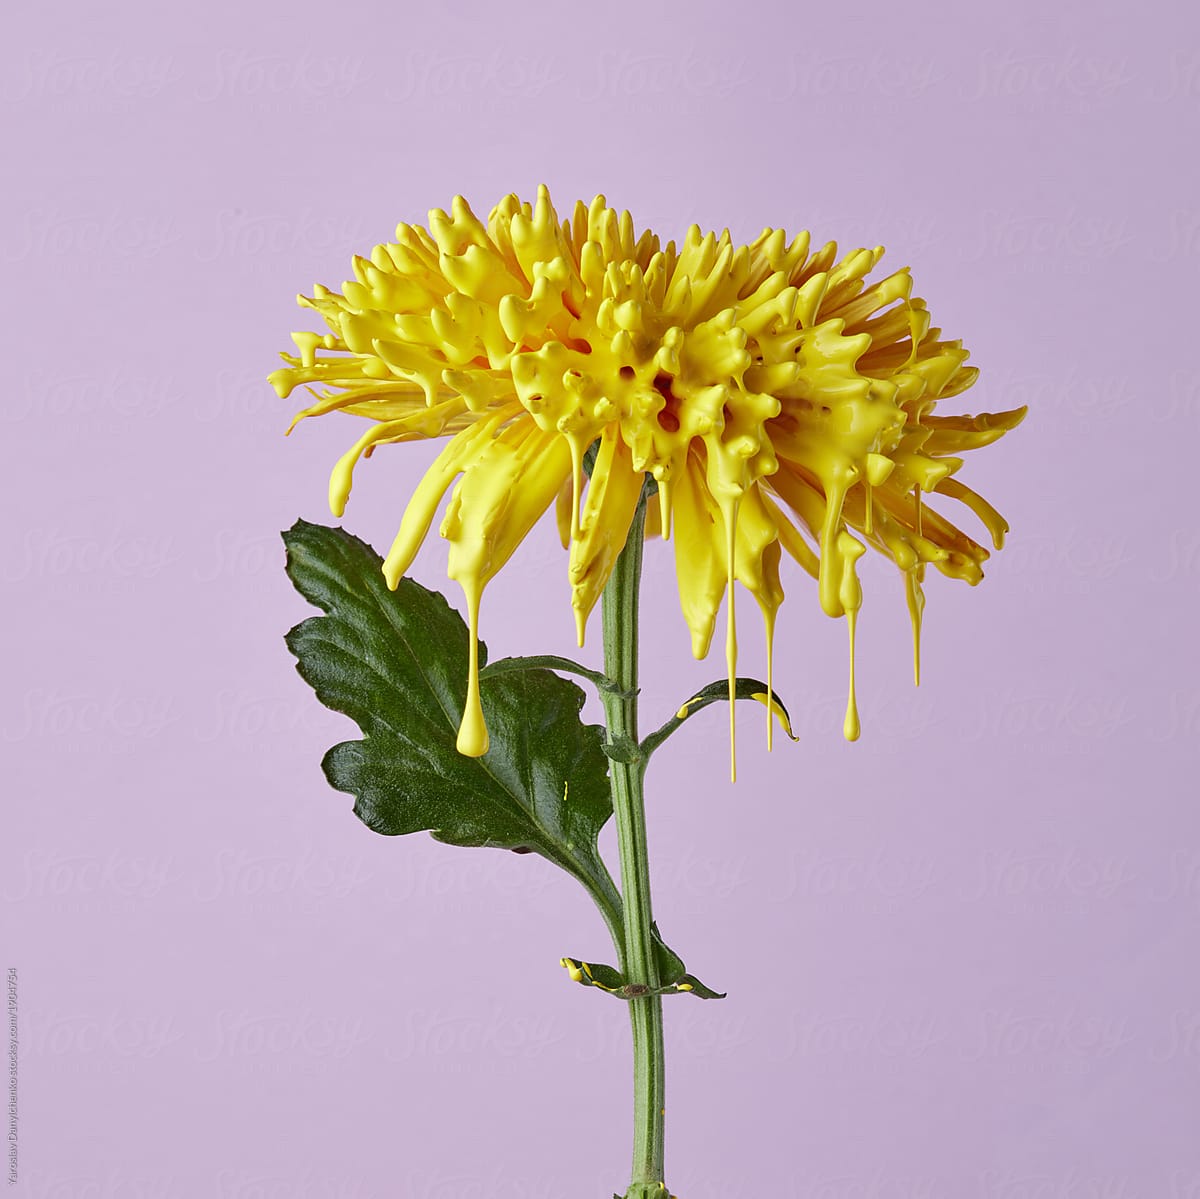 Chrysanthemum painted with yellow paint on a purple background